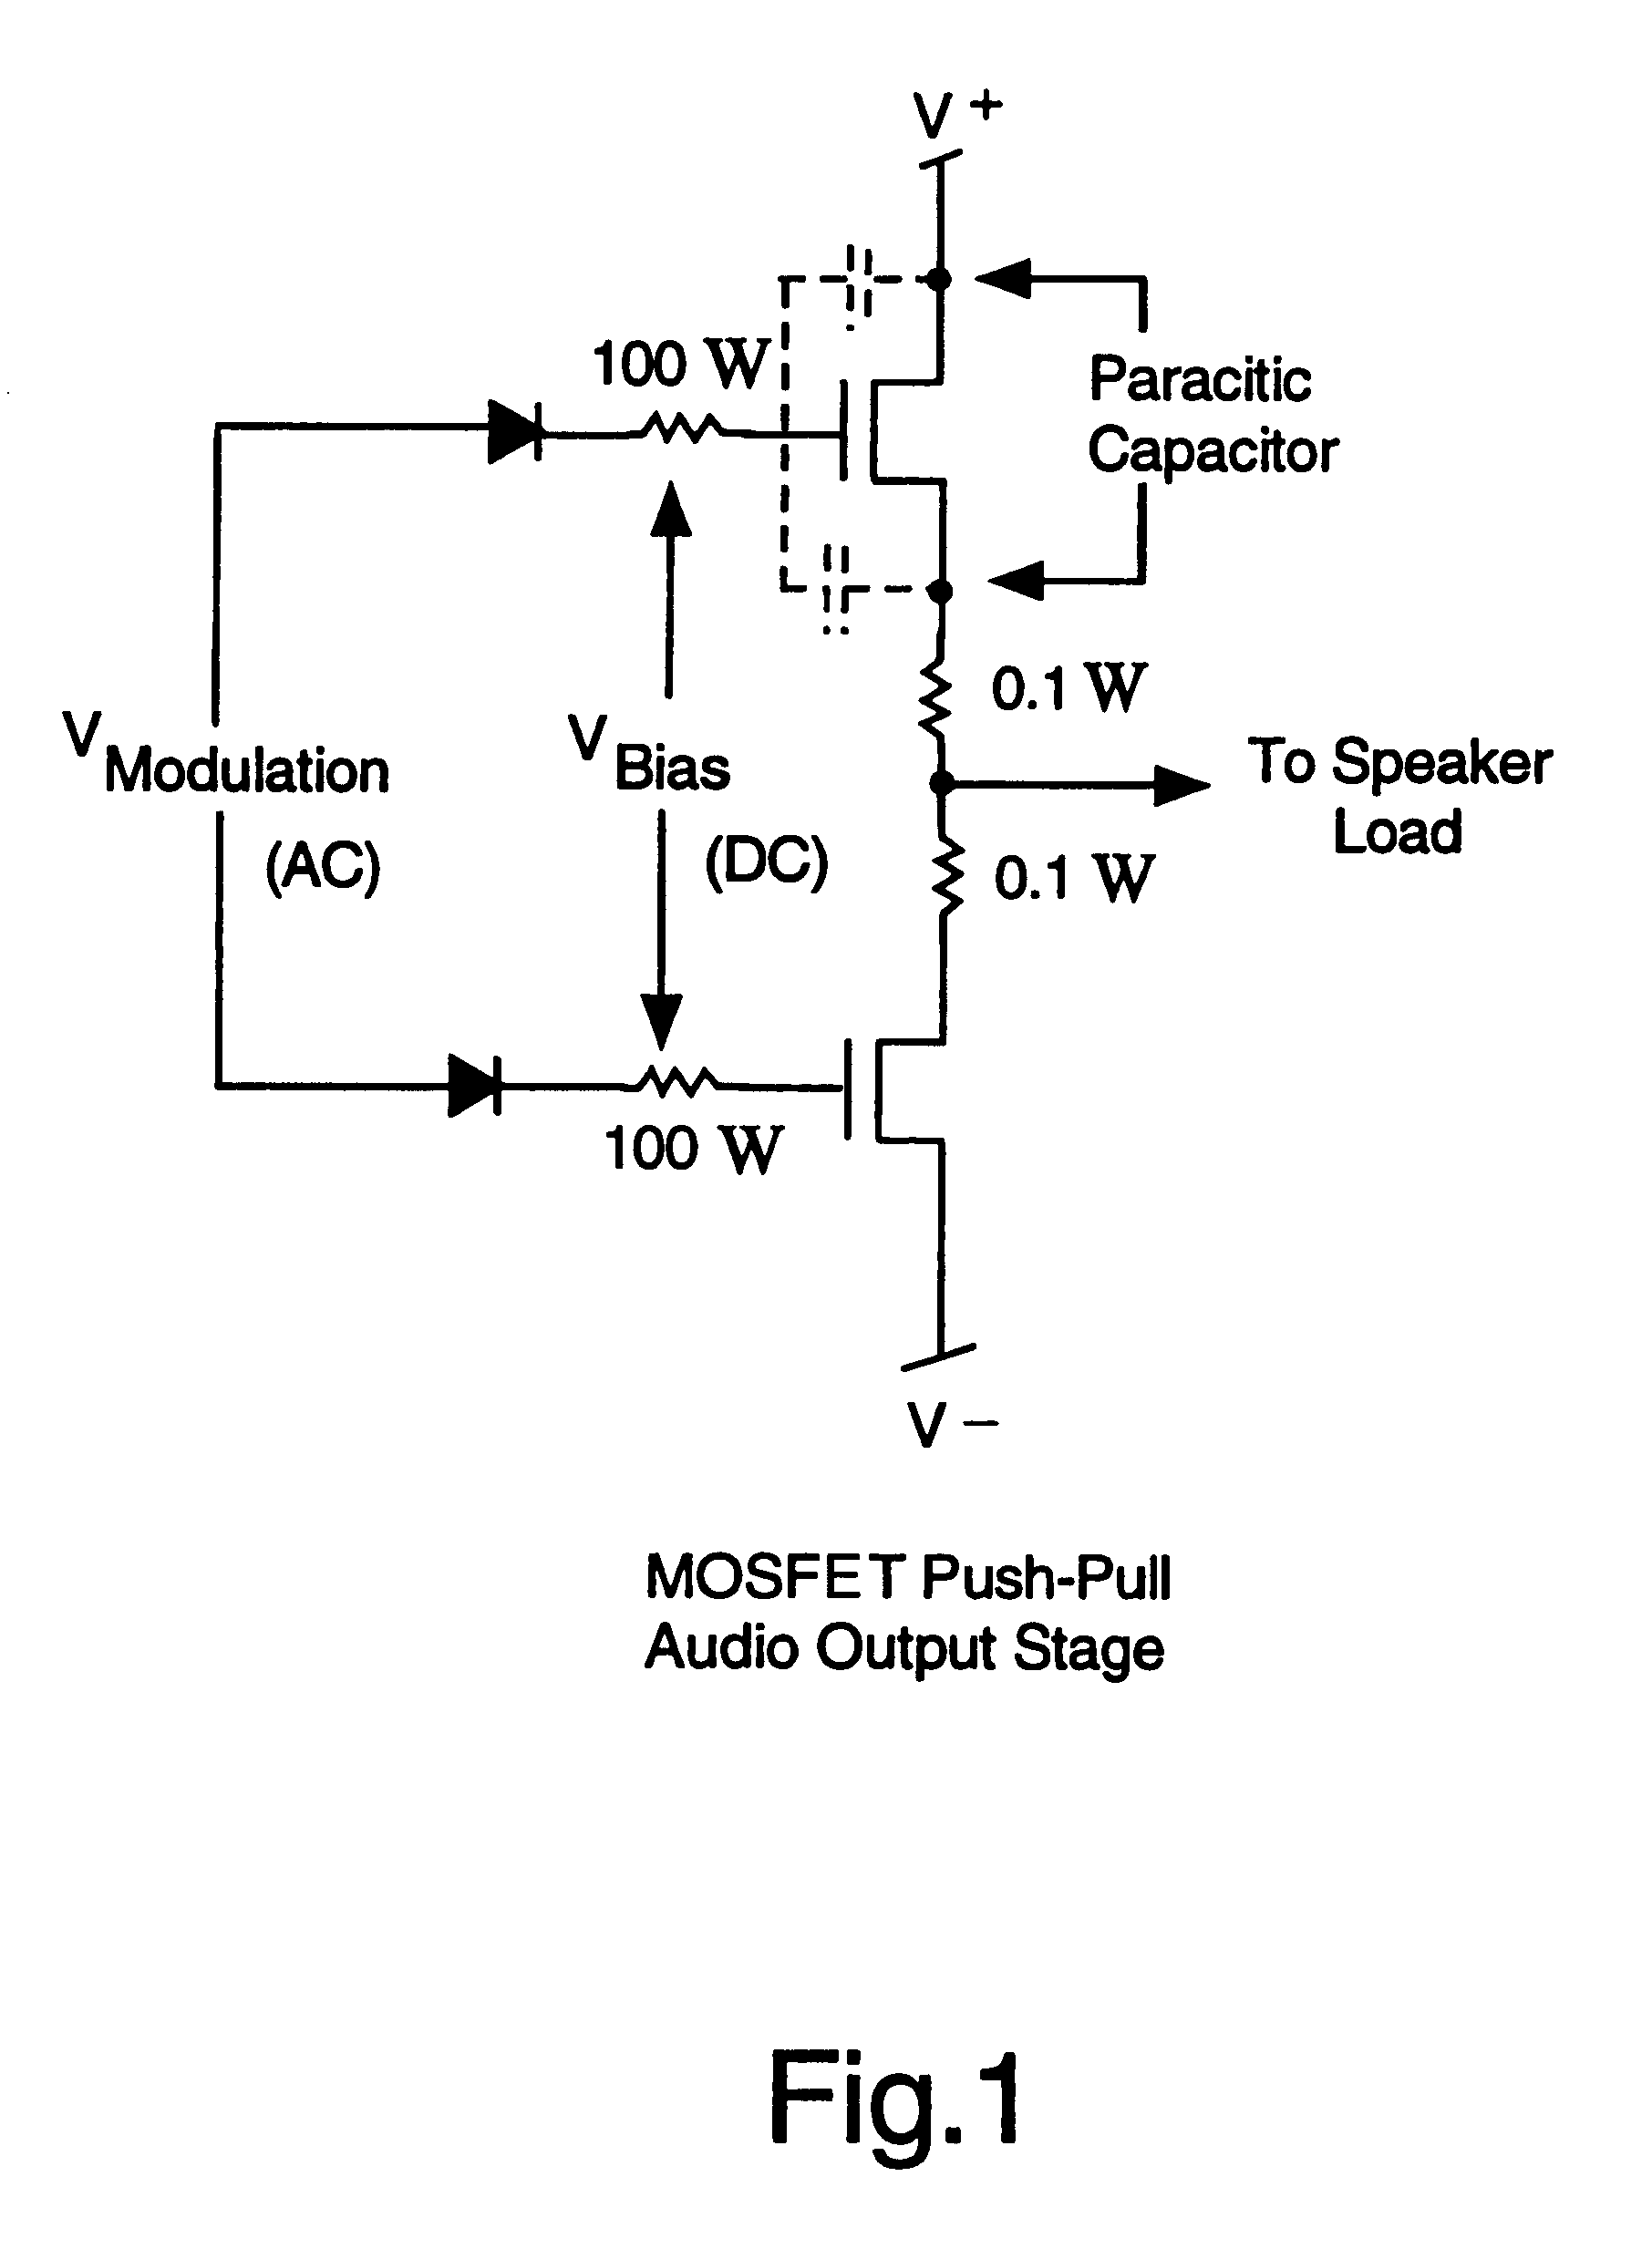 Wide bandwidth, current sharing, MOSFET audio power amplifier with multiple feedback loops